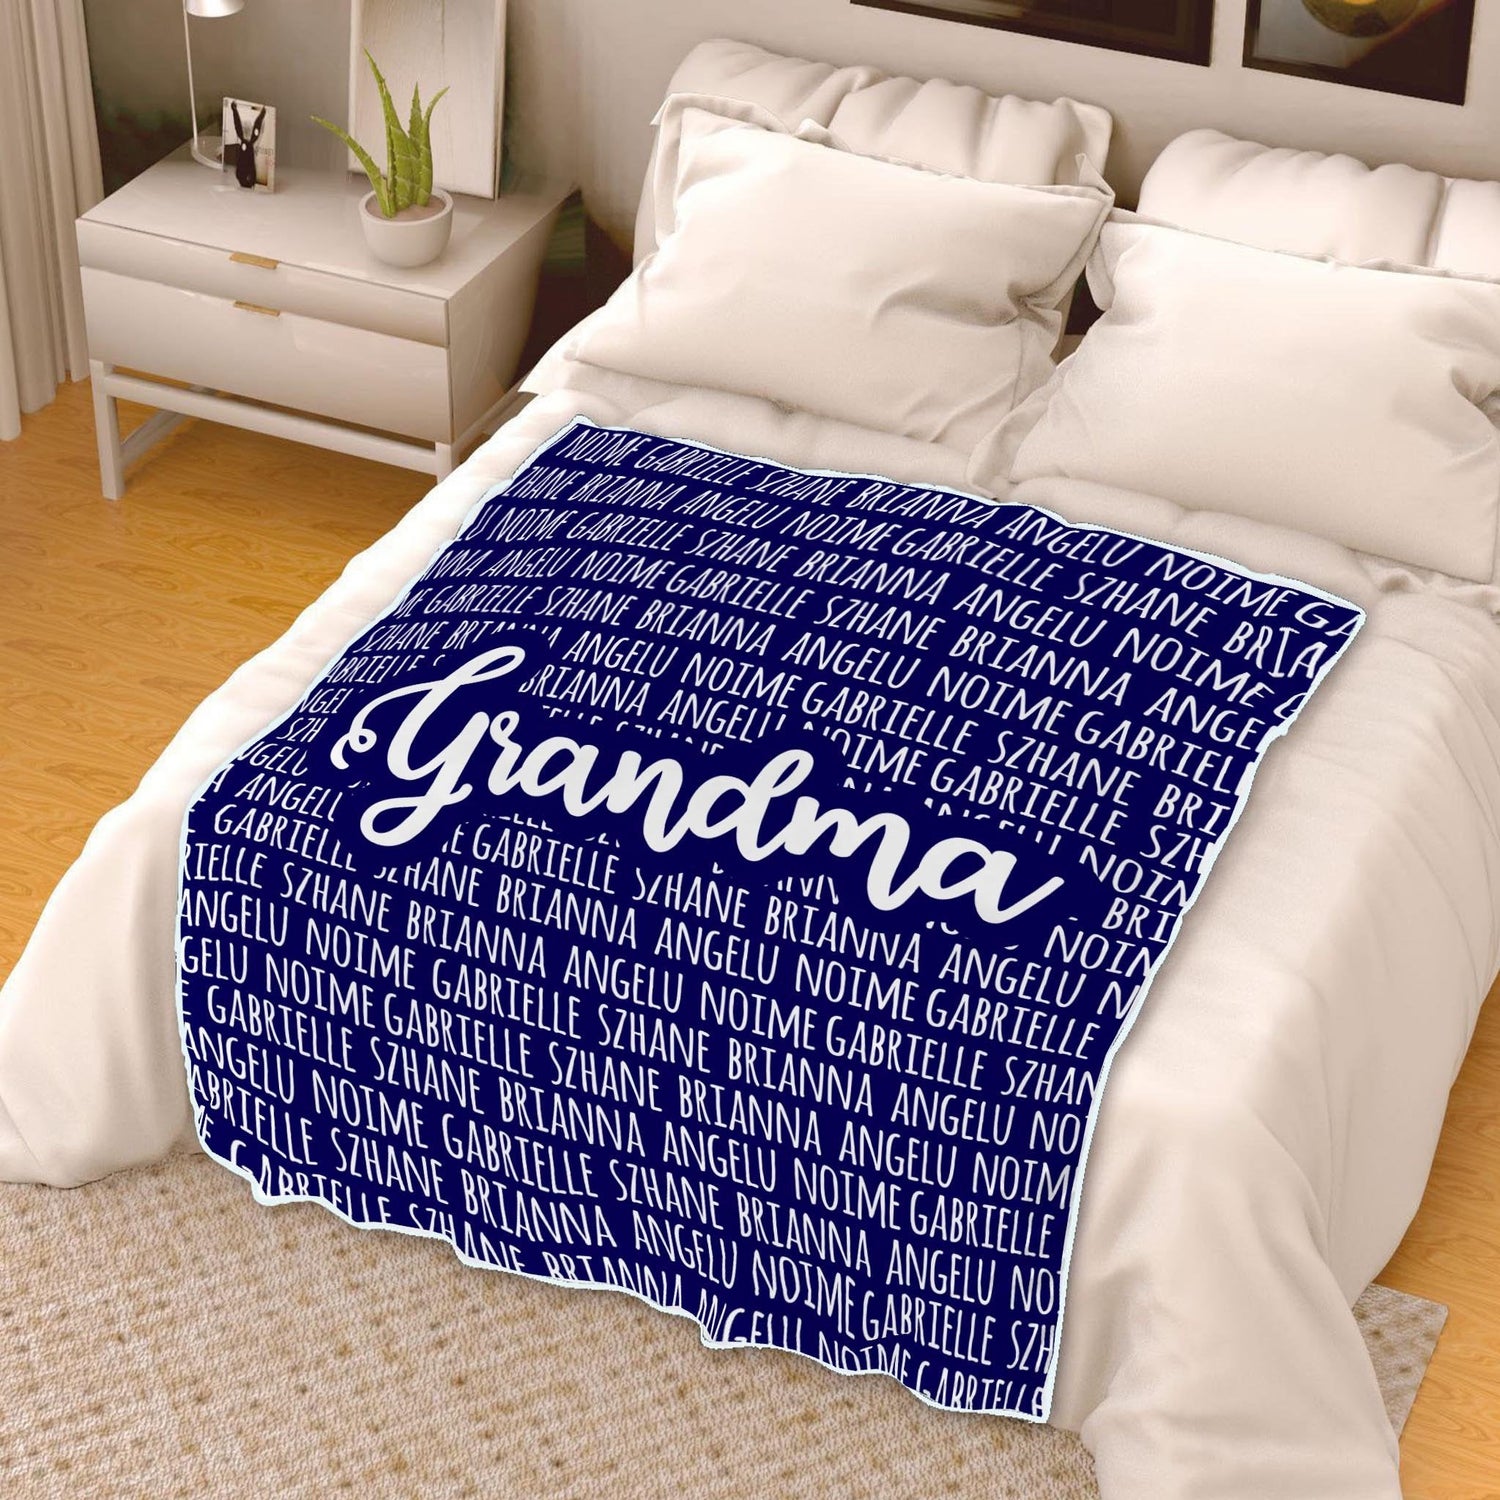 Personalized Blanket For Grandparents - Teegarb